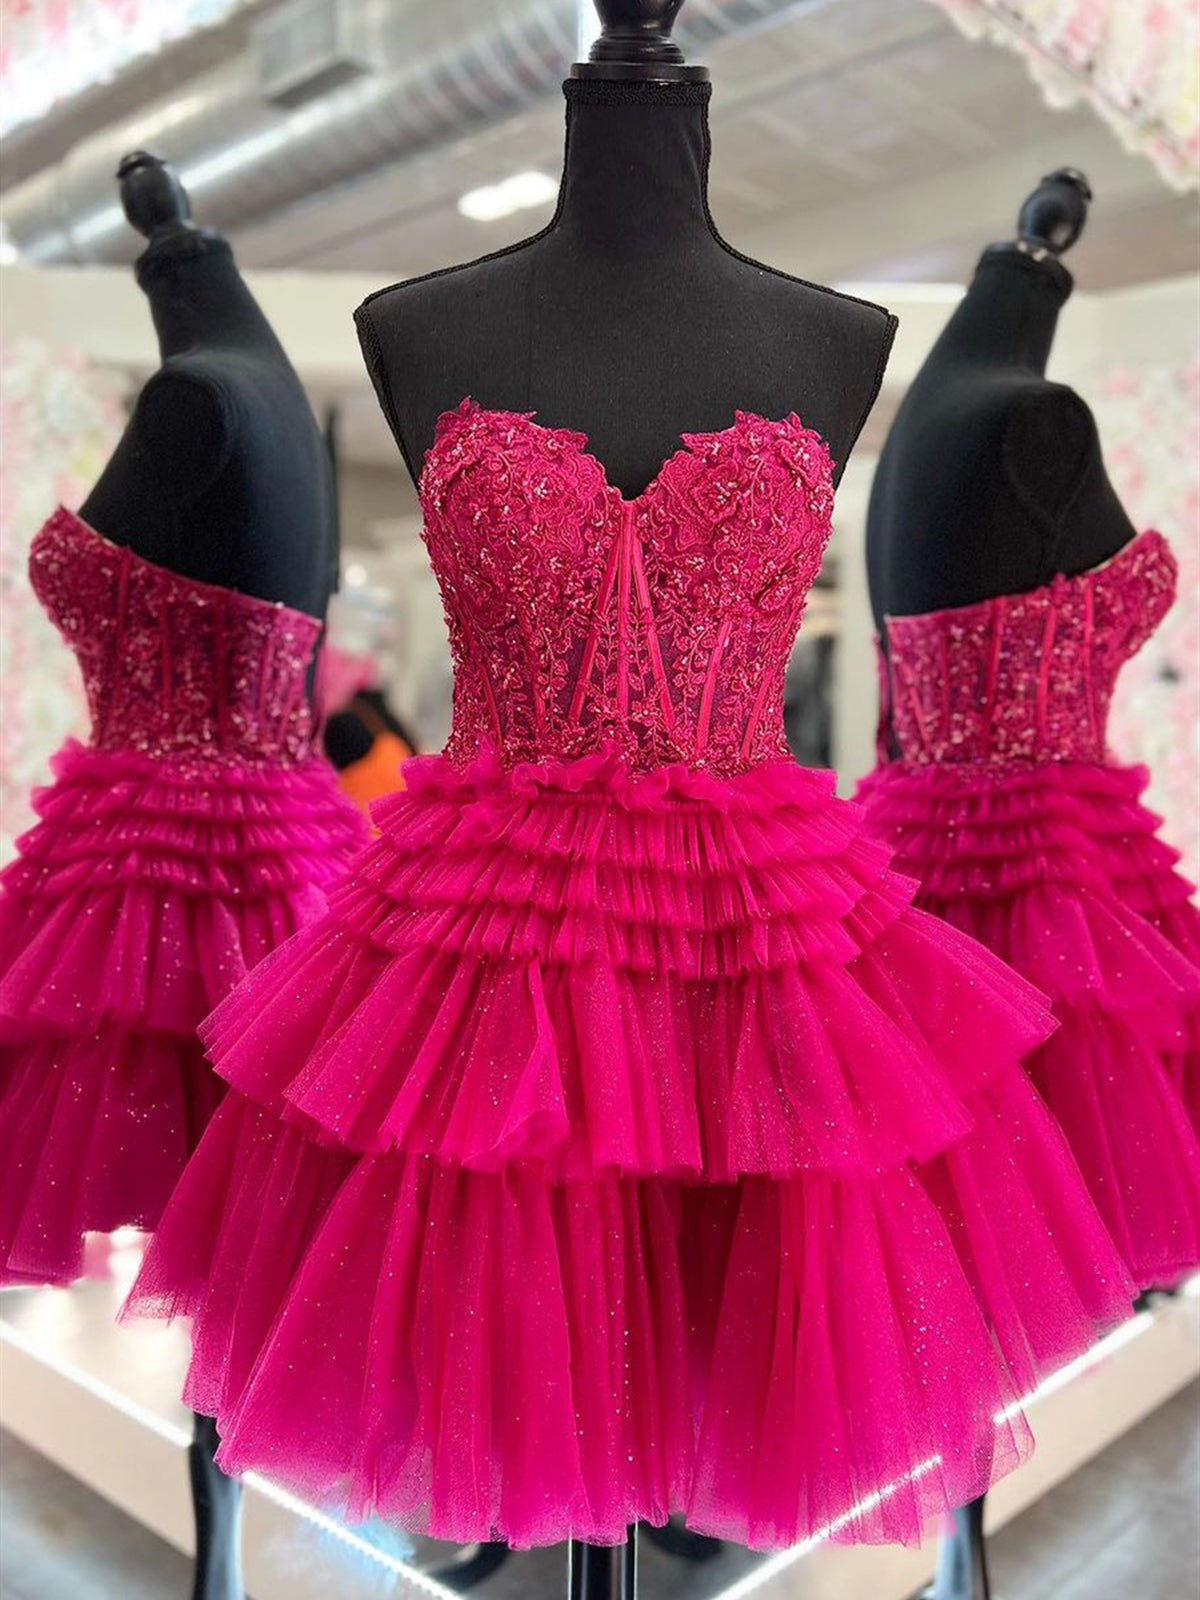 Strapless Short Fuchsia Black Pink Lace Corset Prom Dresses, Short Lace Corset Formal Corset Homecoming Dresses outfit, Bridesmaid Dresses Sage Green